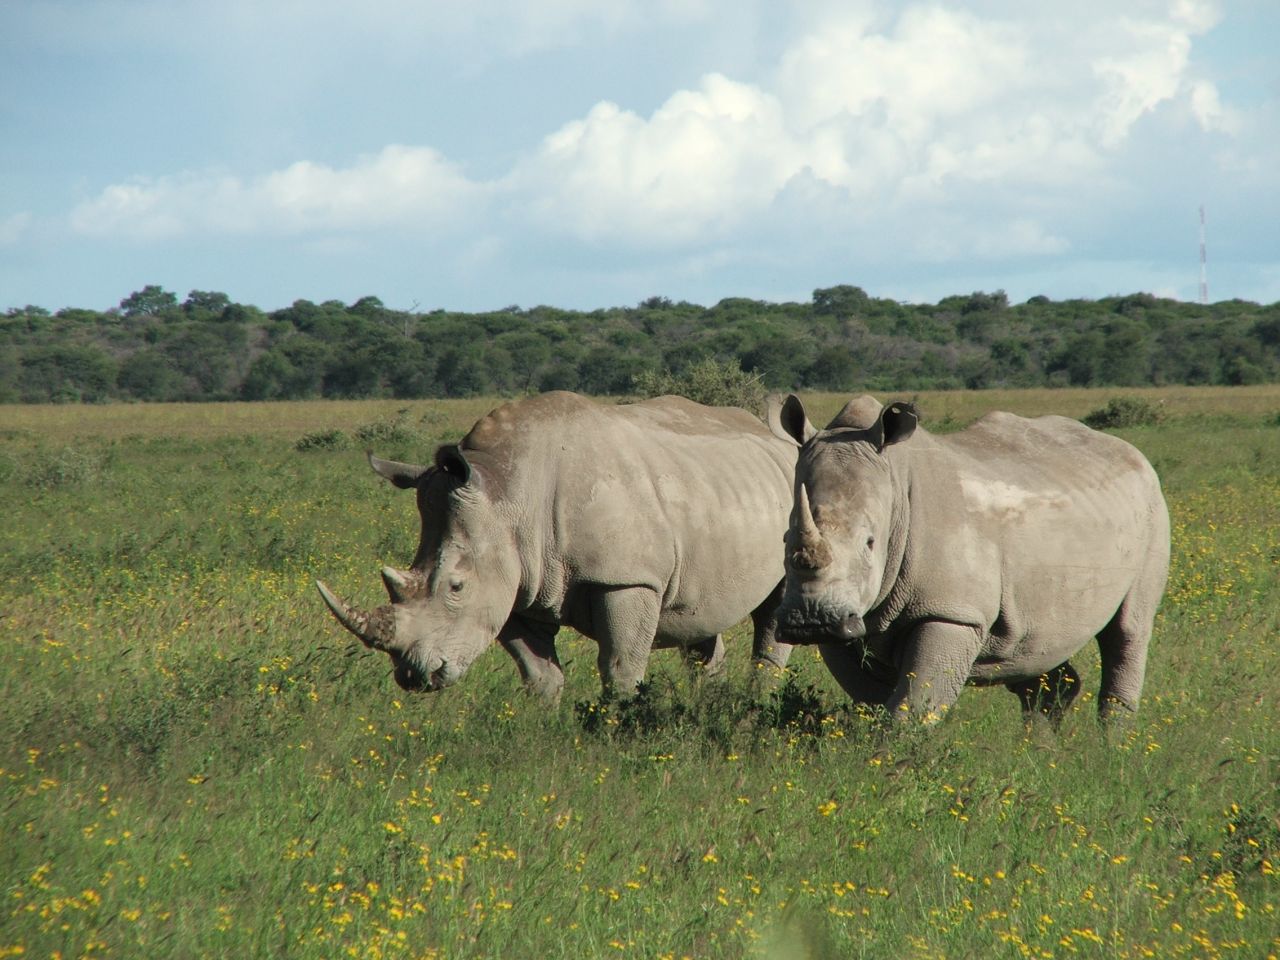 Africa's northern white rhino is "teetering on the brink of extinction" according to the lastest IUCN Red List